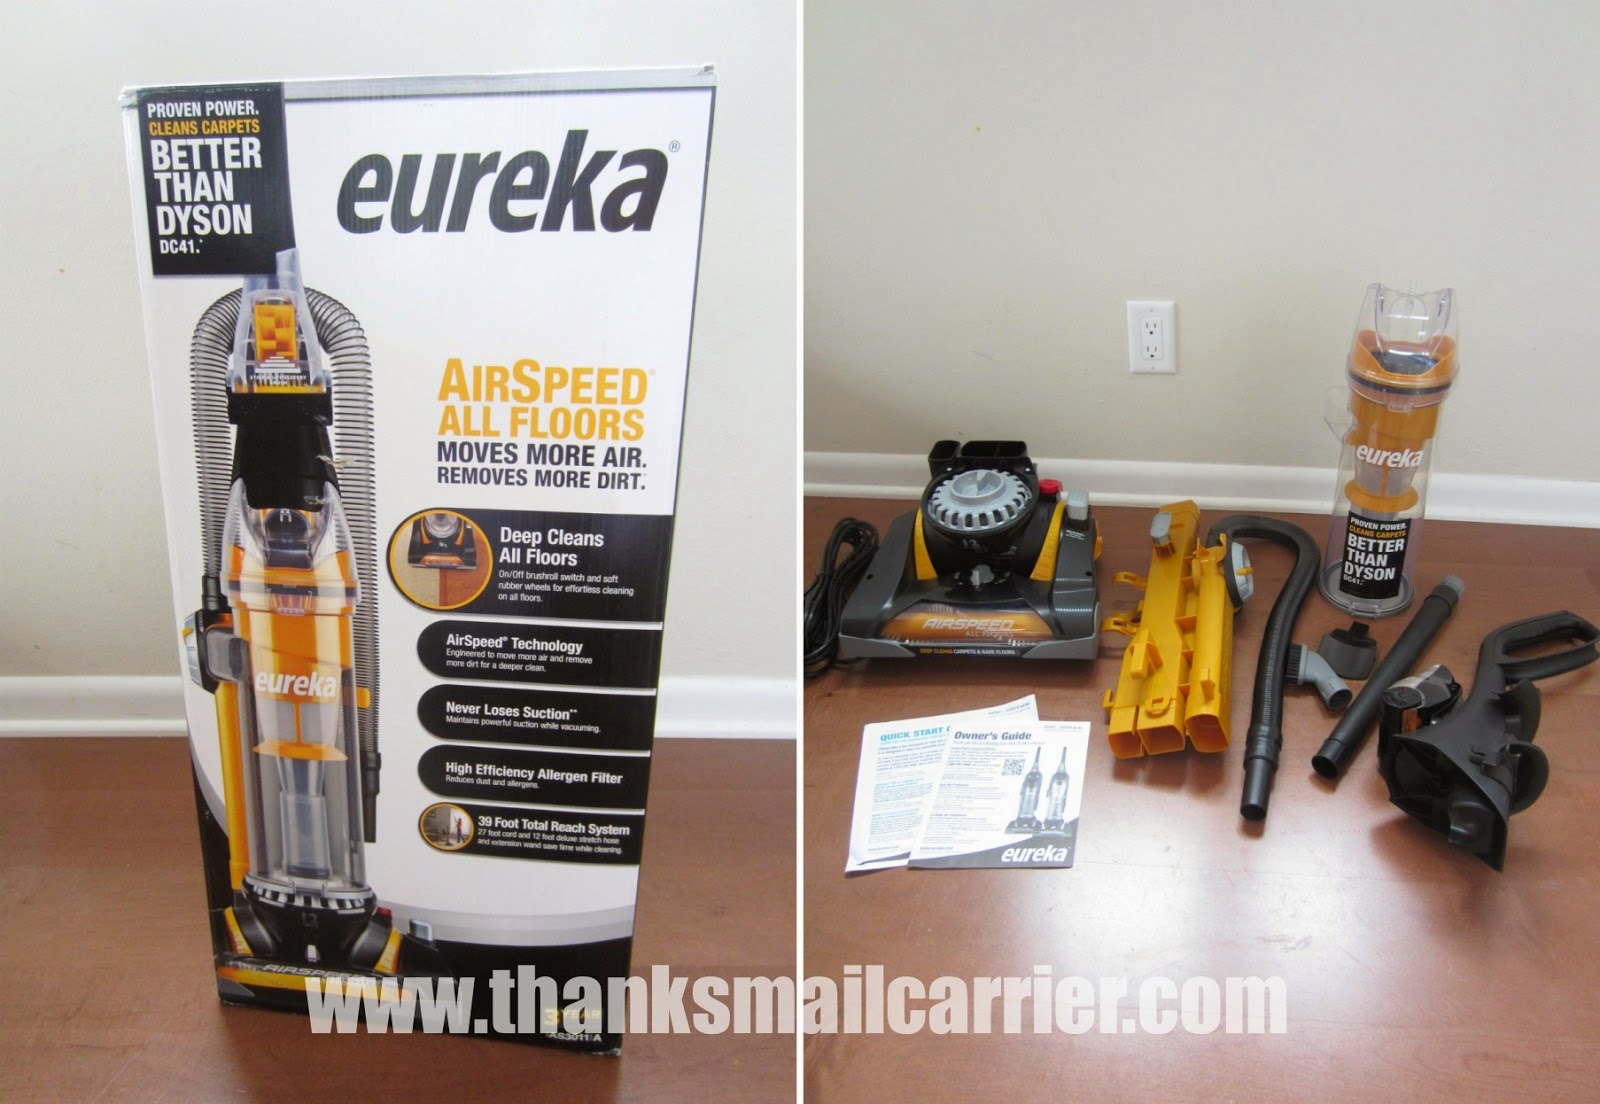 Eureka AirSpeed All Floors assembly